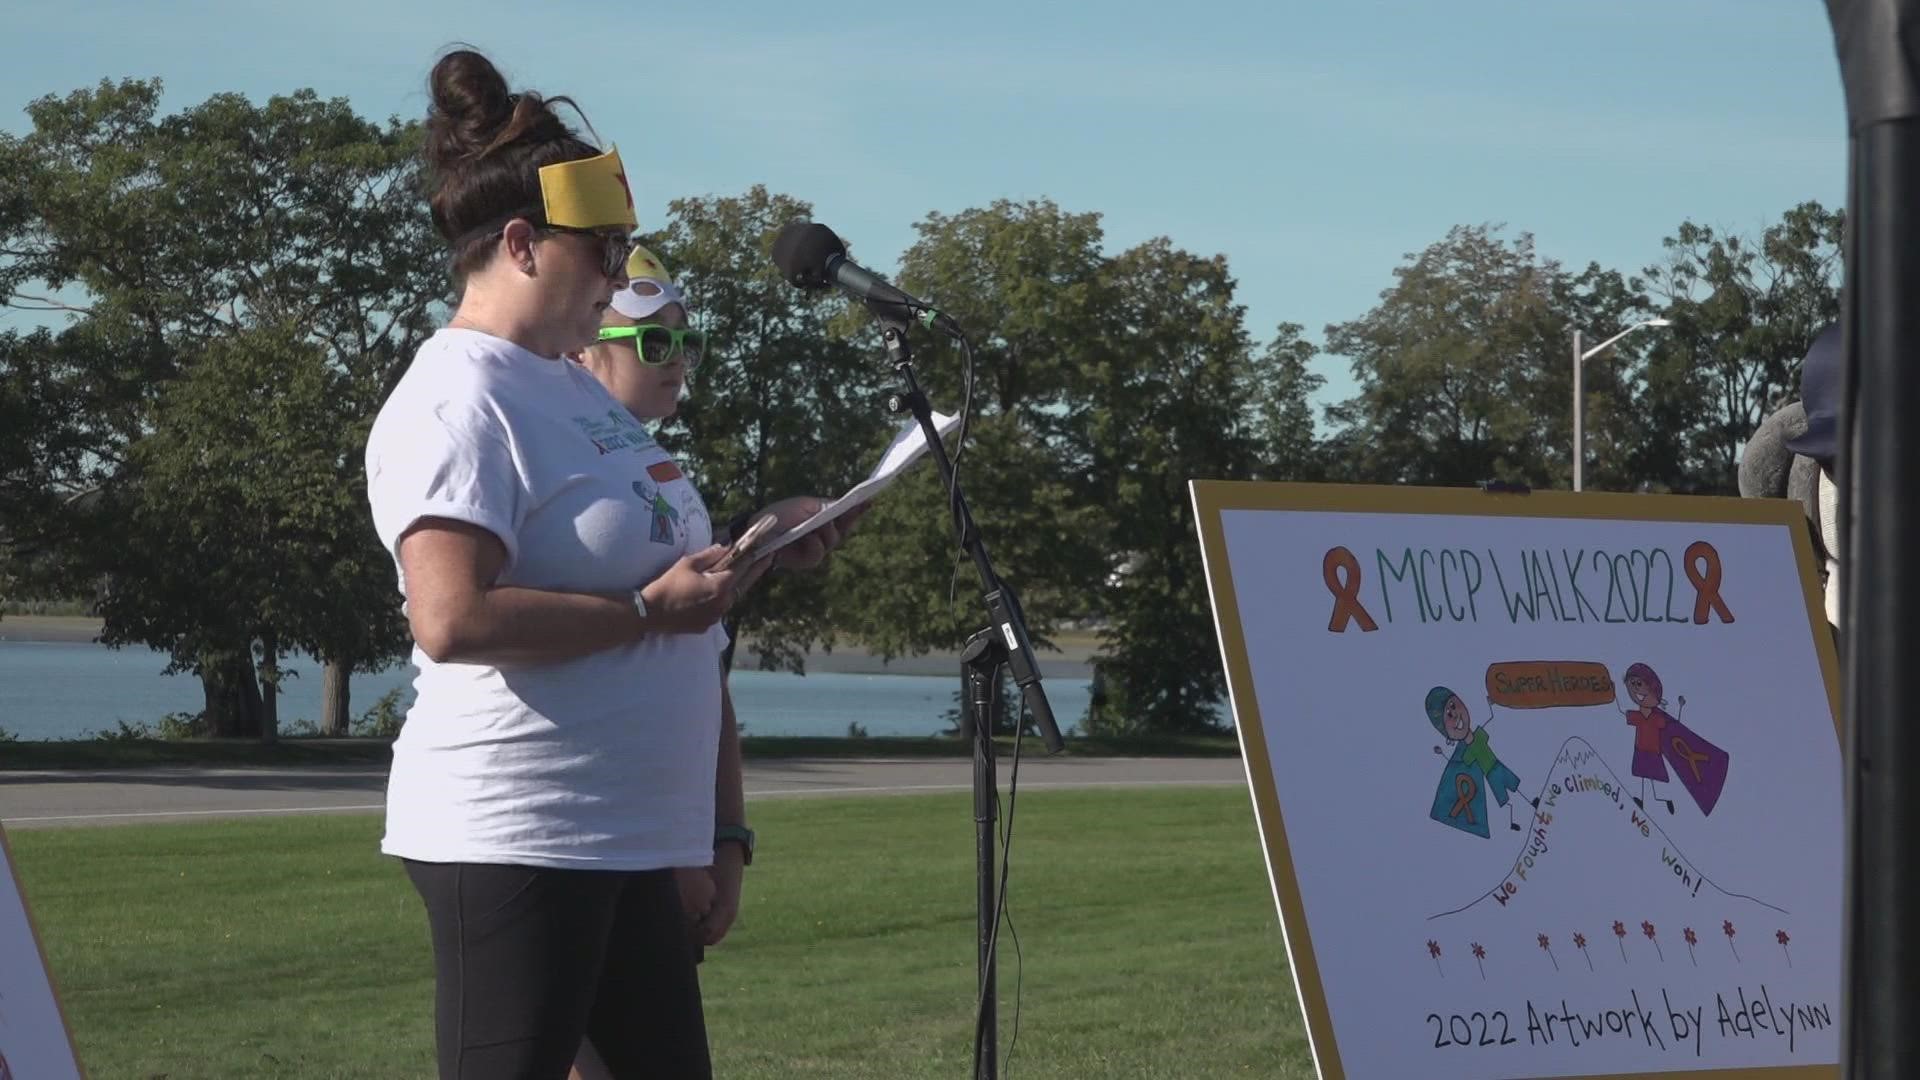 Hundreds of people gathered in Payson Park in Portland on Saturday, September 17 for a walk to support children battling cancer. Organizers say so far, they've raise